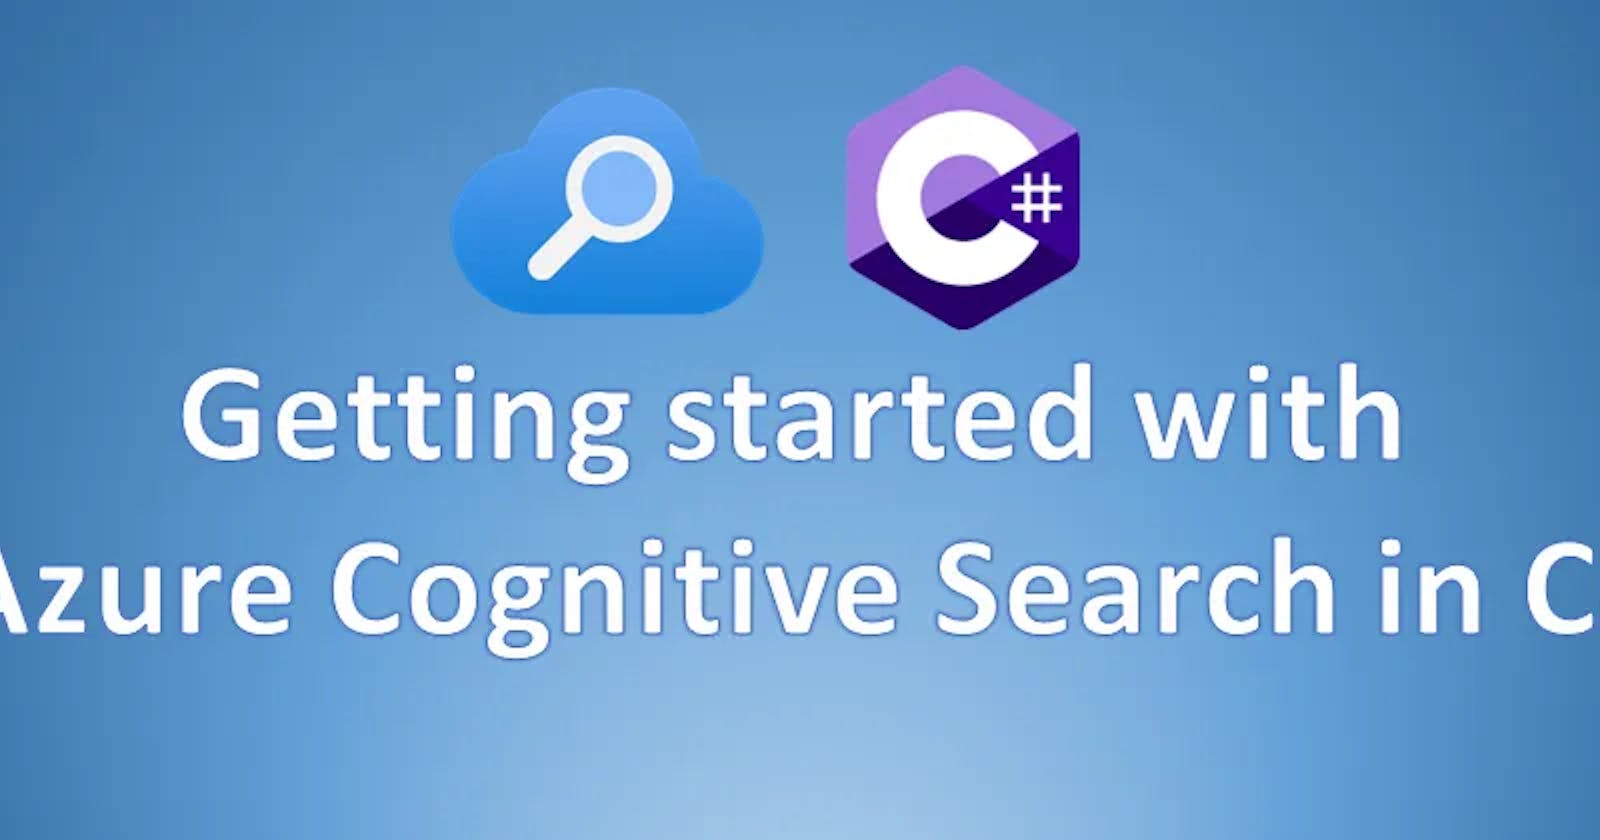 Getting started with Azure Cognitive Search in C#